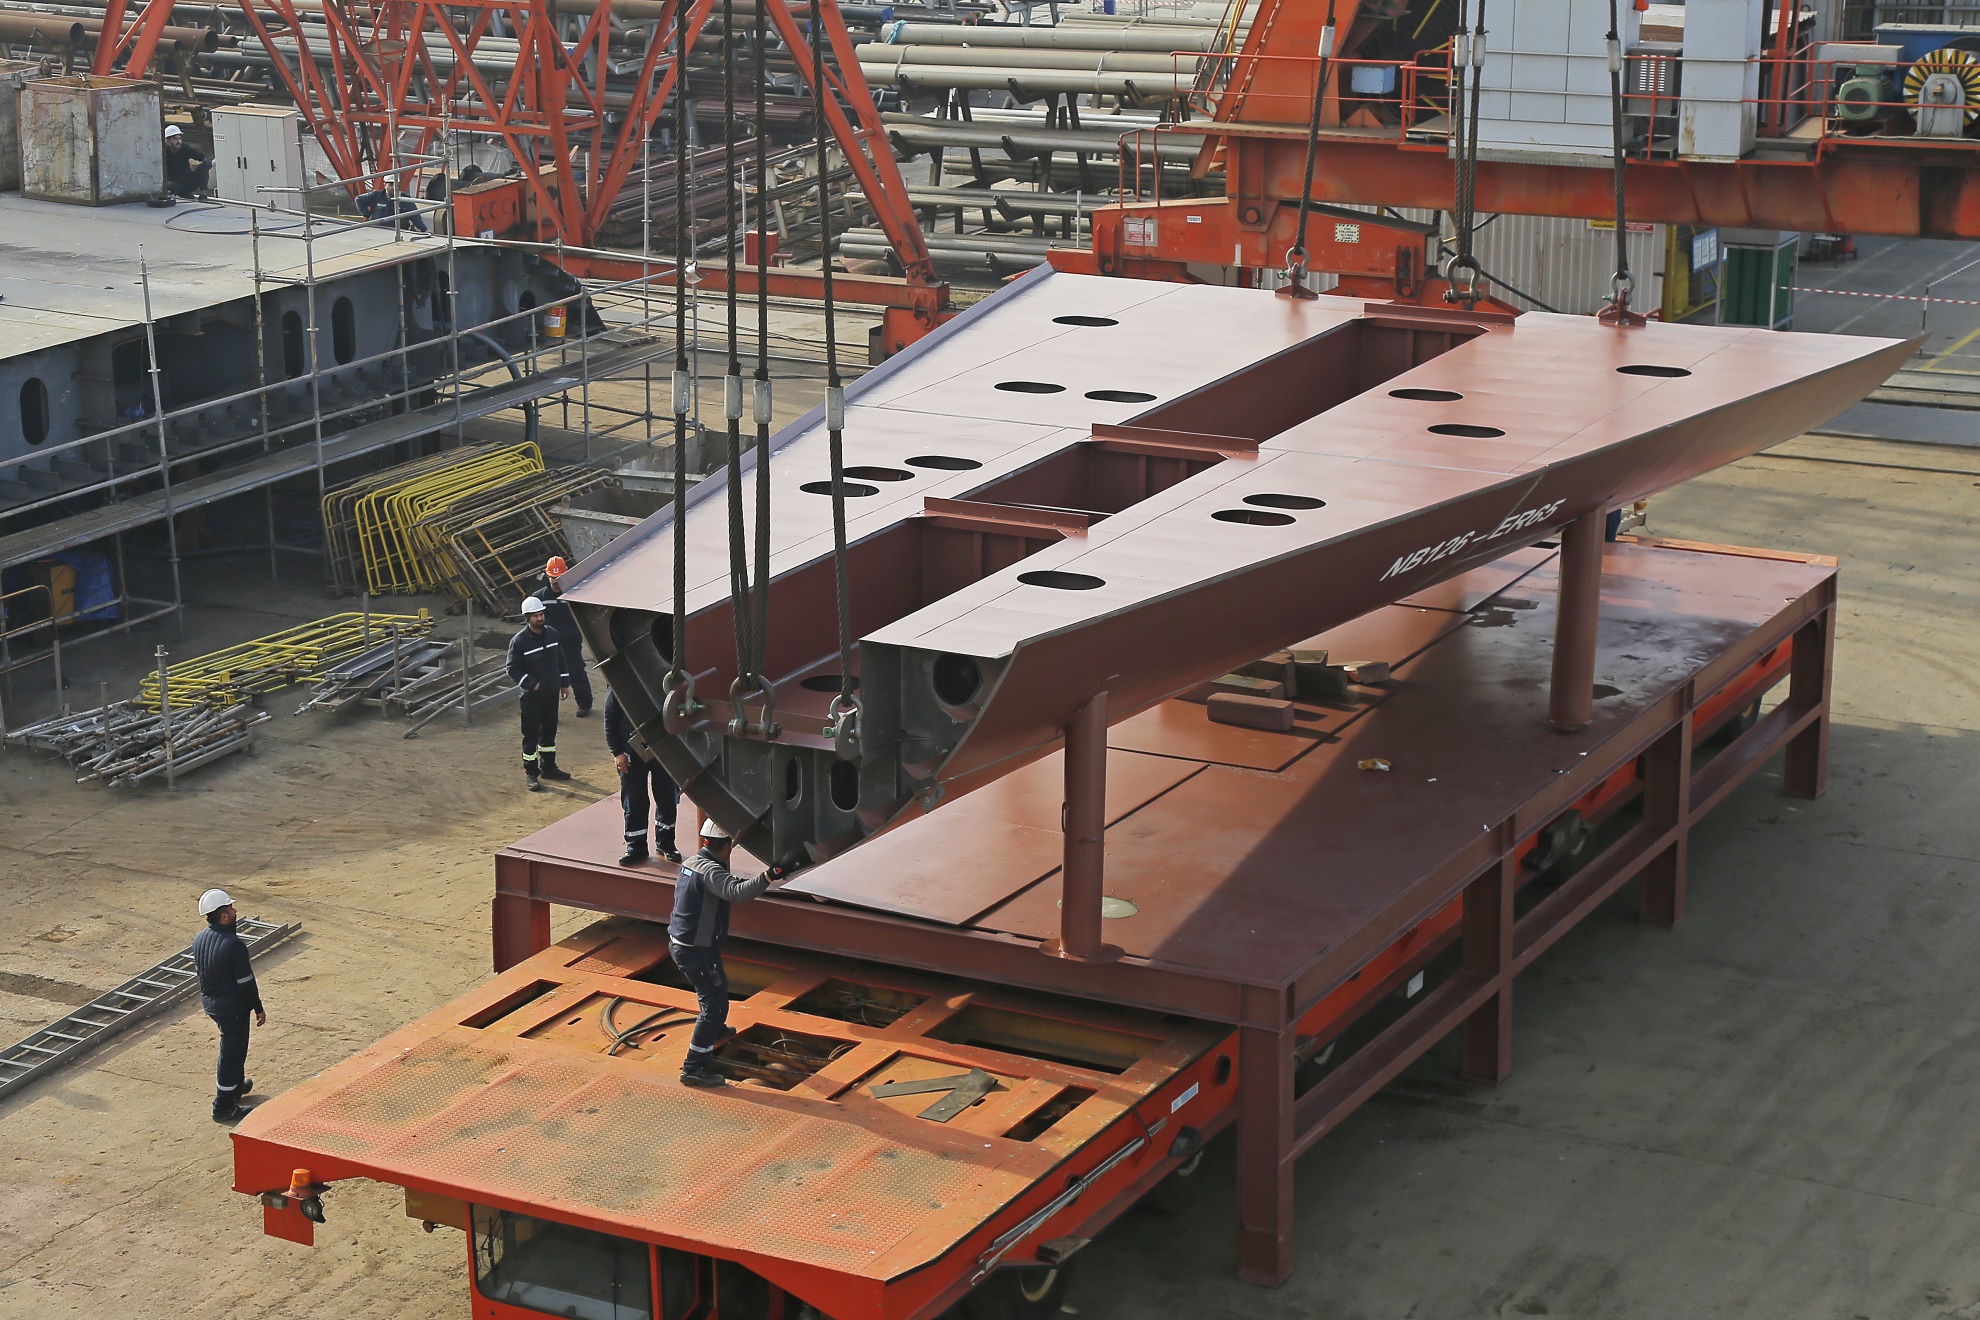 The Keel Laying Ceremony of the new 65-meter yacht (NB126) has taken place